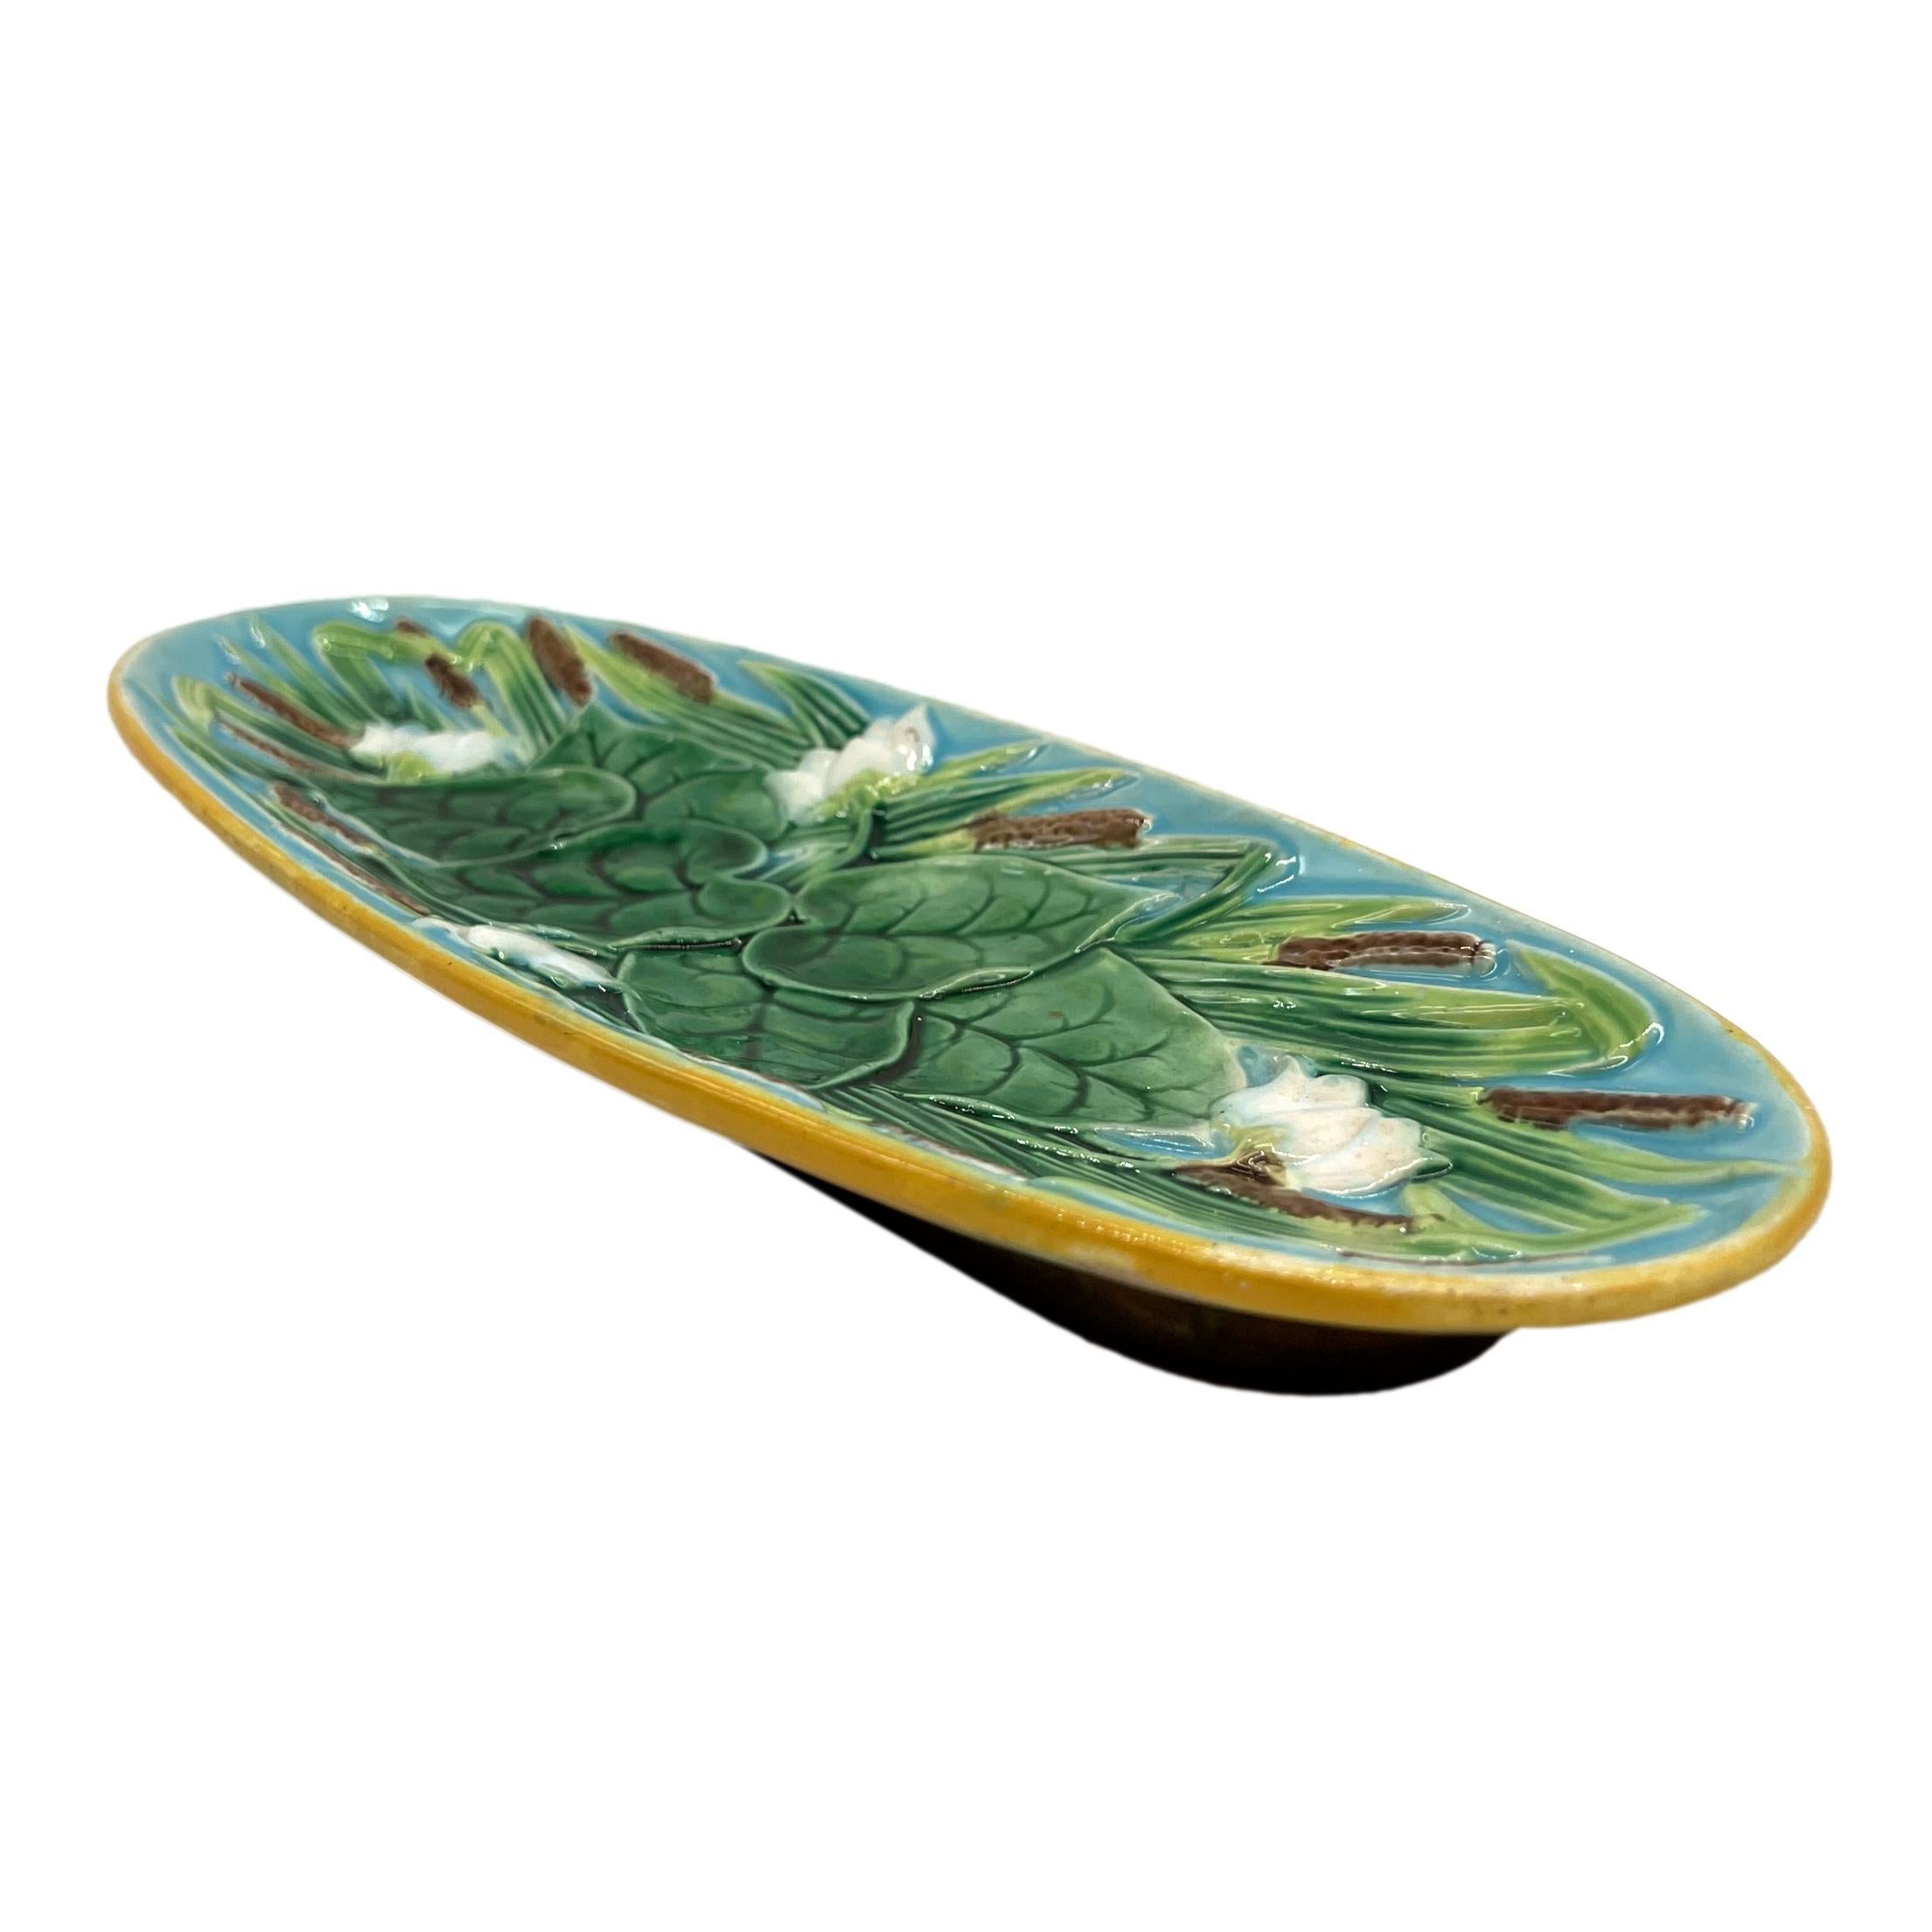 Victorian George Jones Majolica Pond Lilies and Bullrushes 10-in Tray, English, c. 1875 For Sale